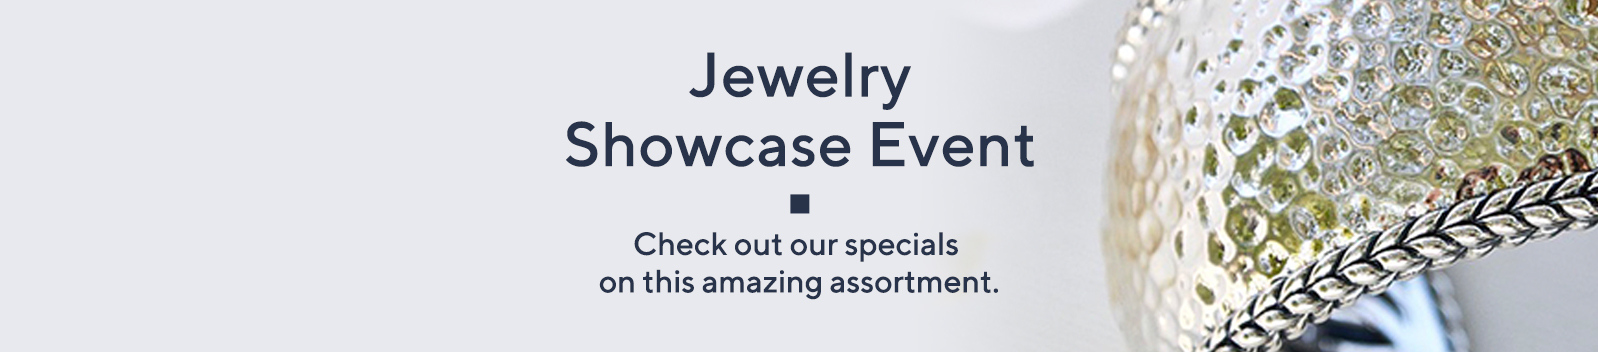 Jewelry Showcase Event - Check out our specials on this amazing assortment.